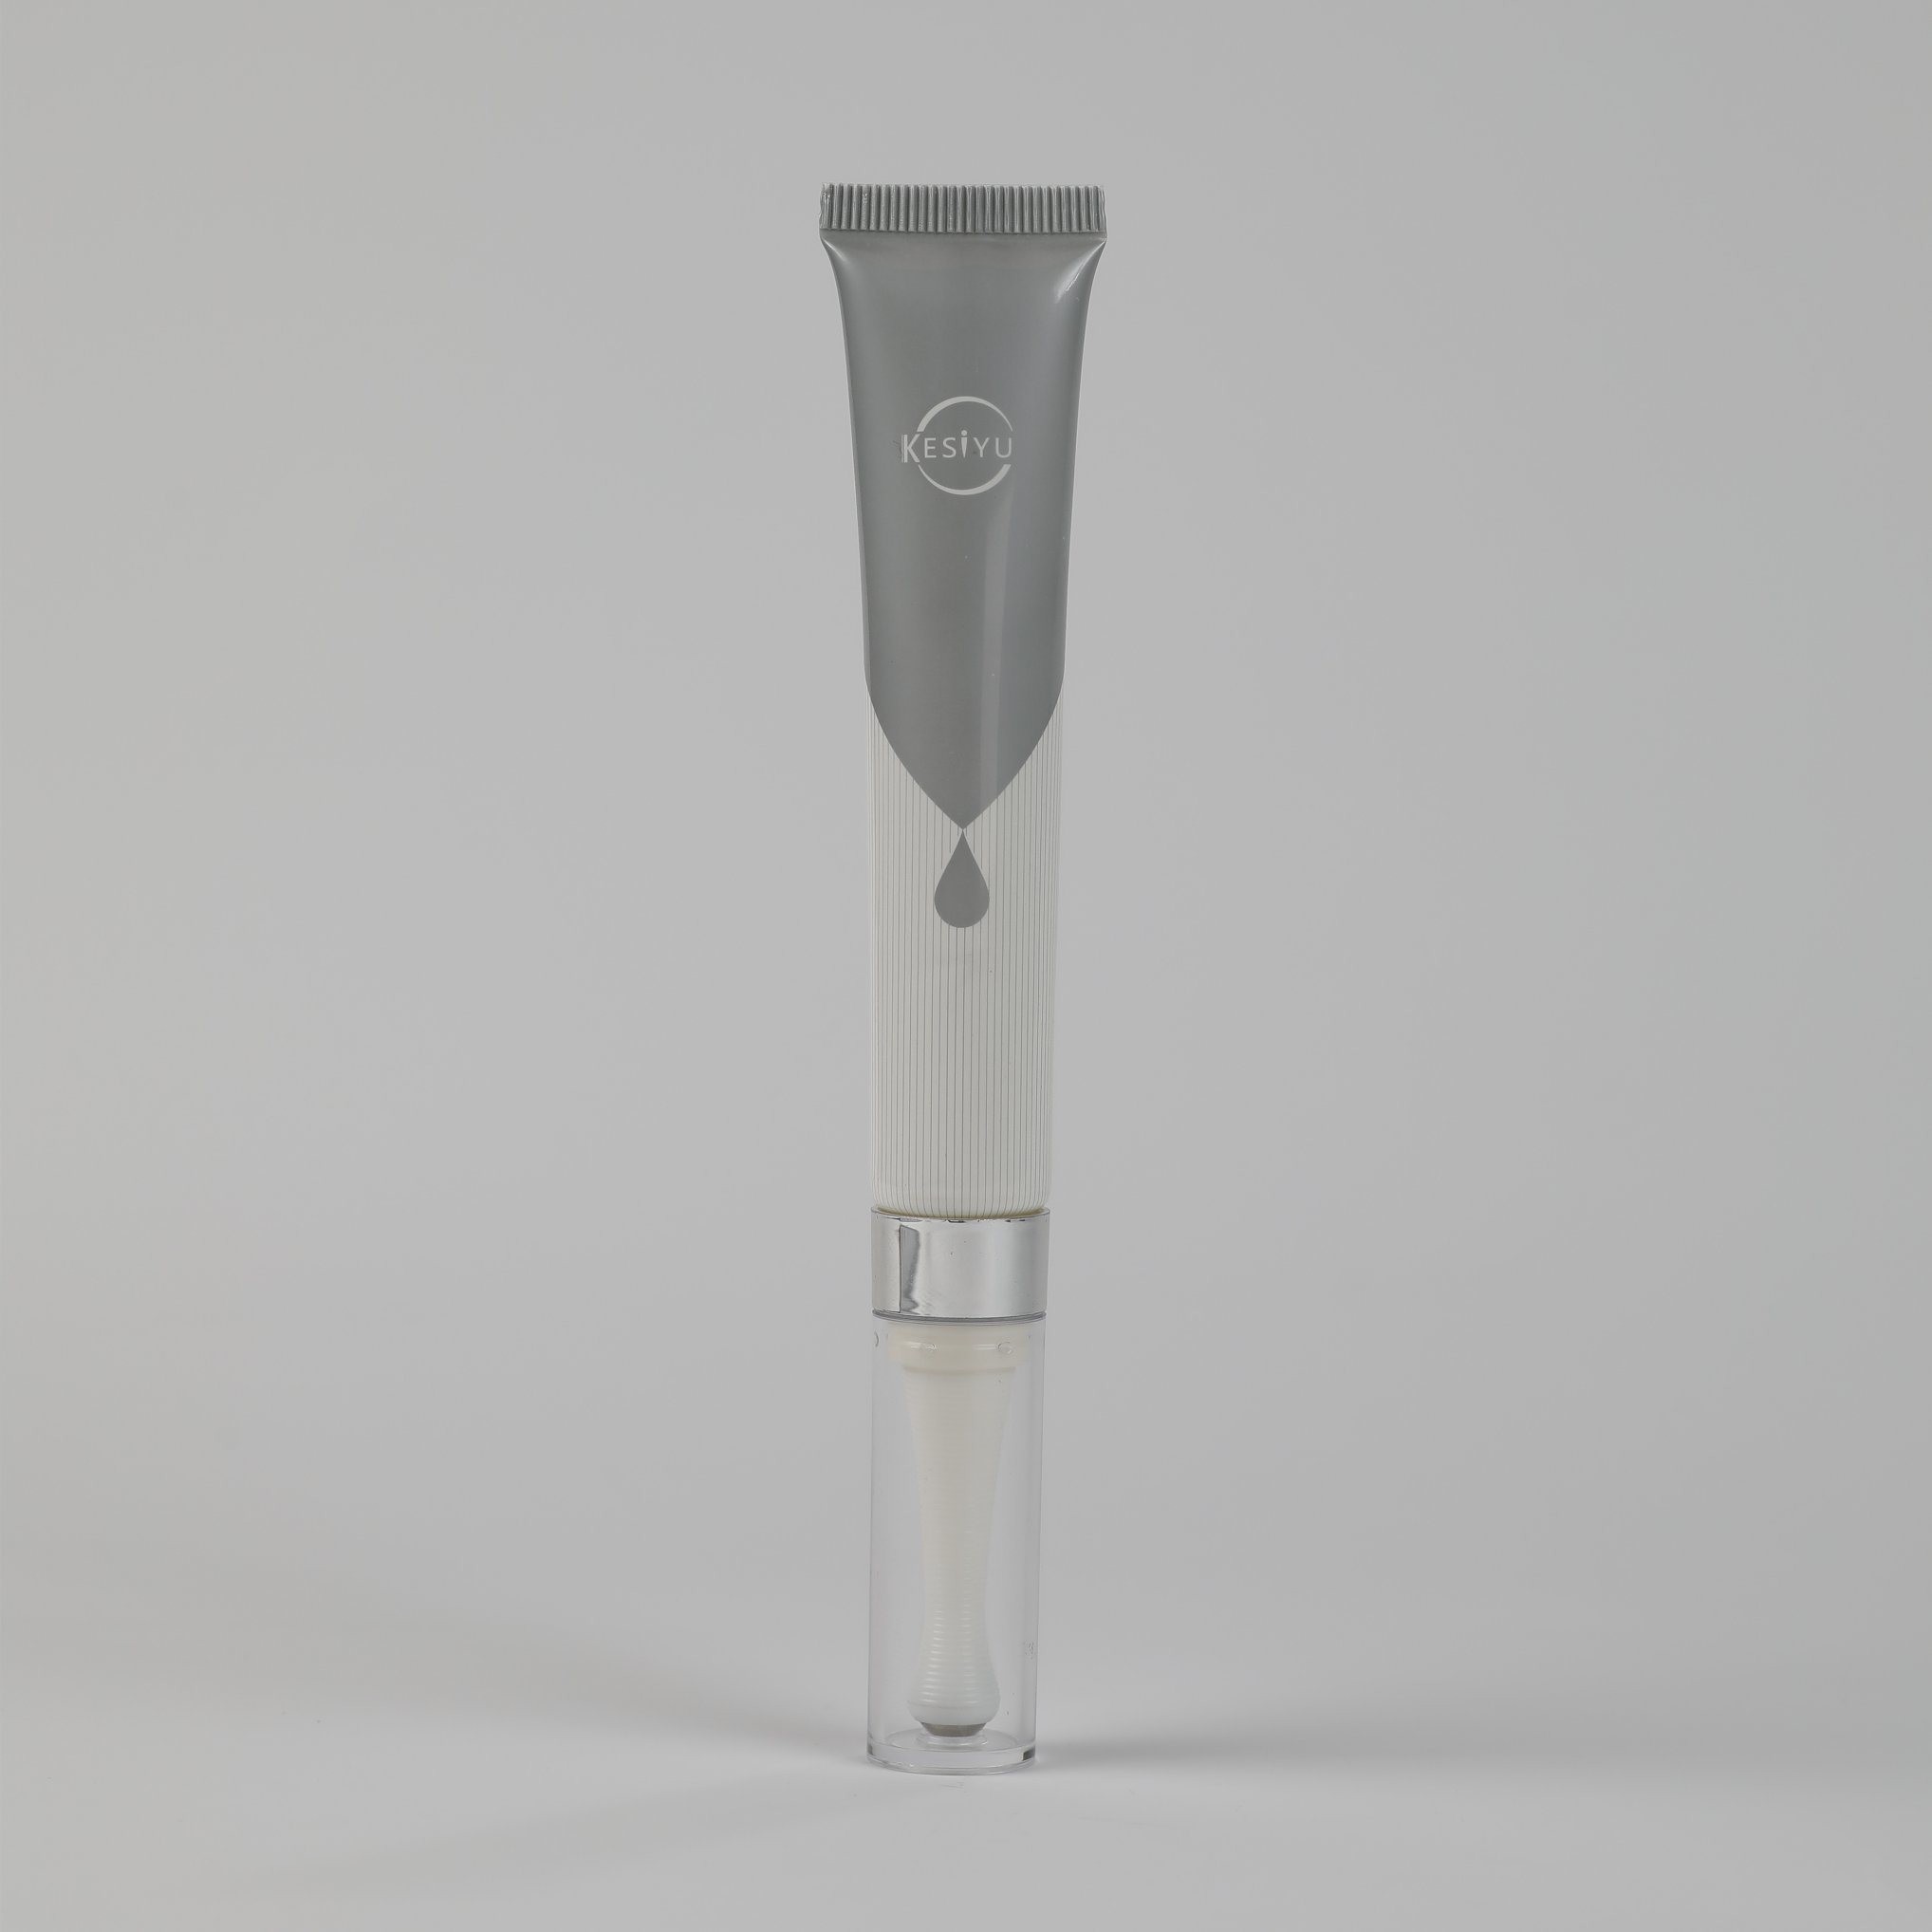 China Supplier of Small Clear Plastic Cosmetic Soft Touch Squeeze Packaging Tube